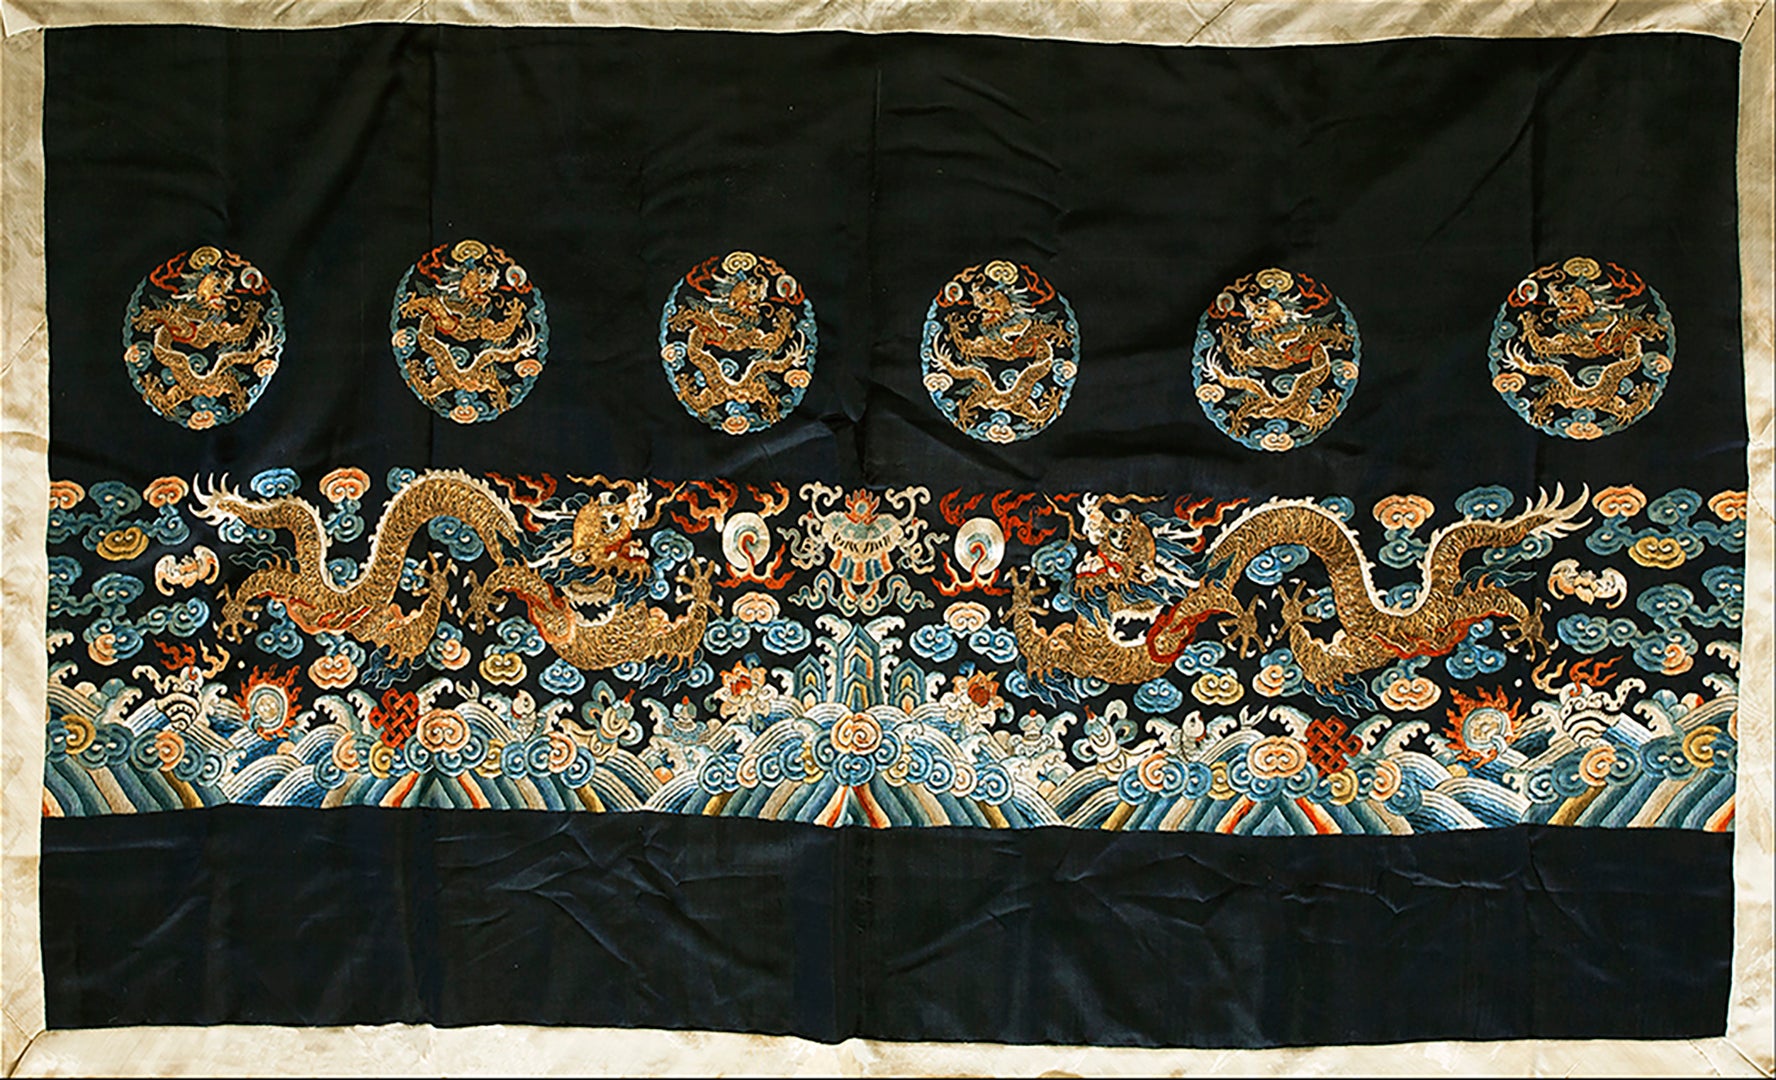 19th Century Chinese Silk & Metallic Thread Embroidery (2'6" x 4'4" - 76 x 132) For Sale